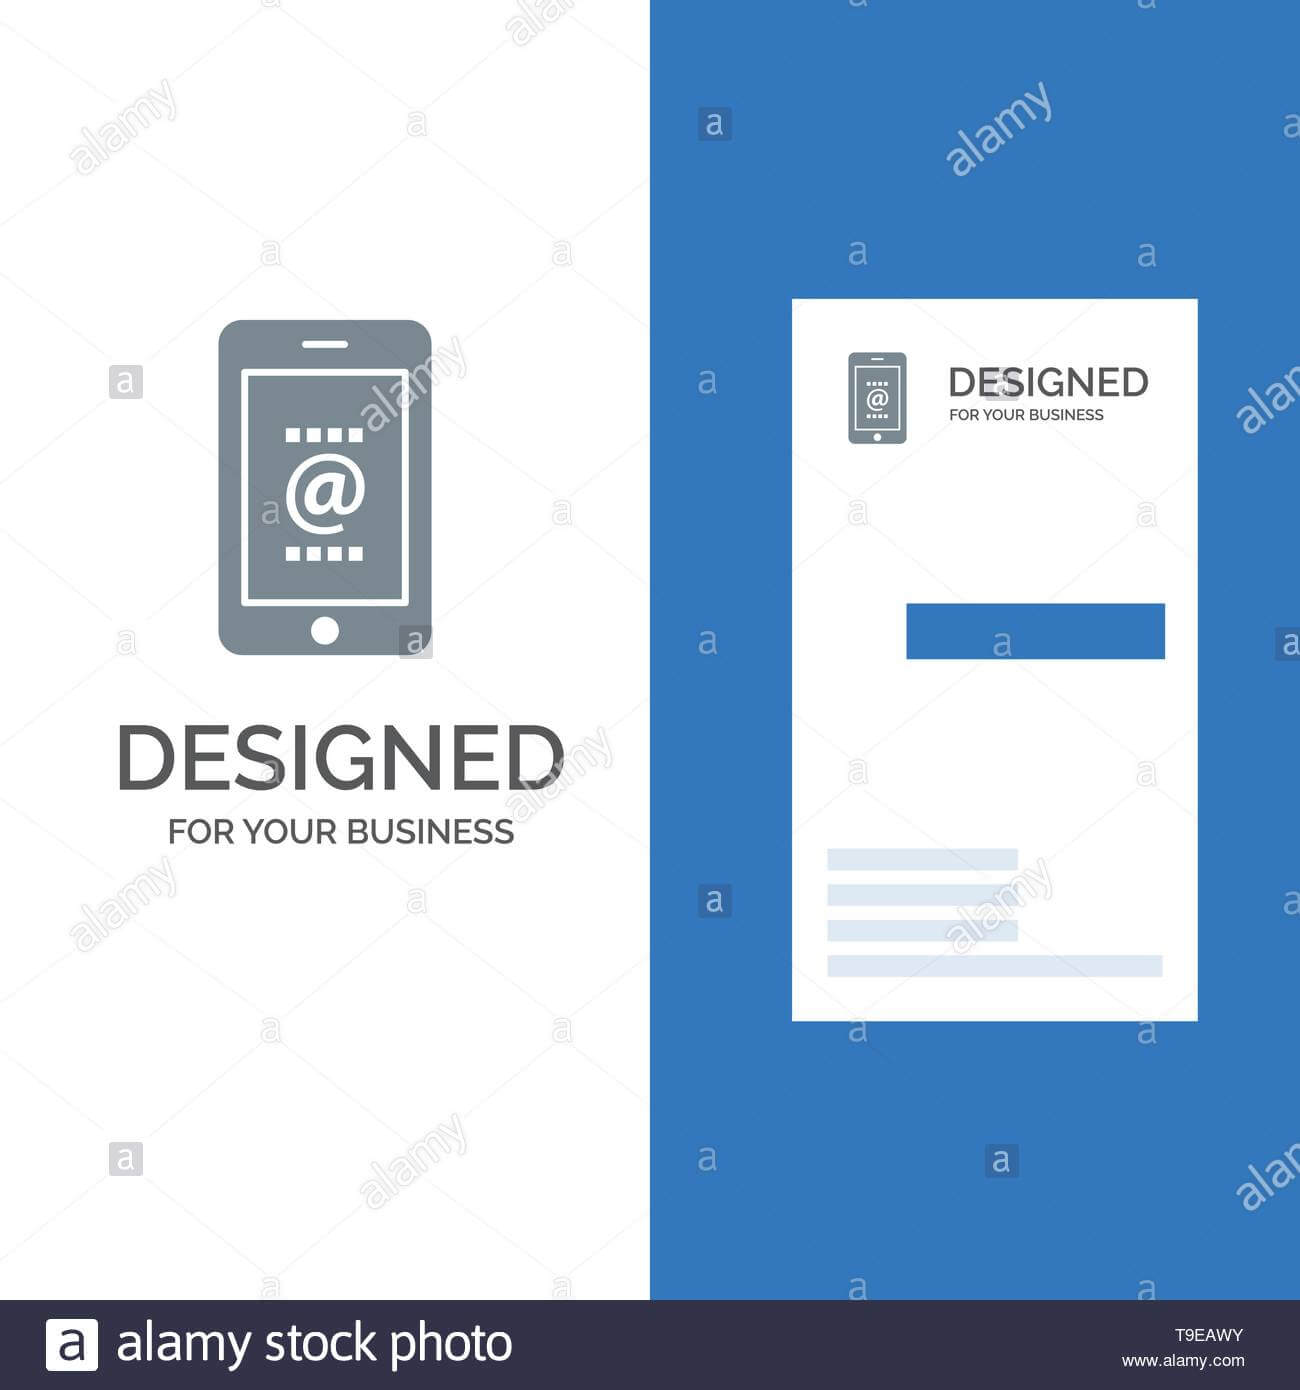 Personal Id Card Stock Photos & Personal Id Card Stock In Personal Identification Card Template